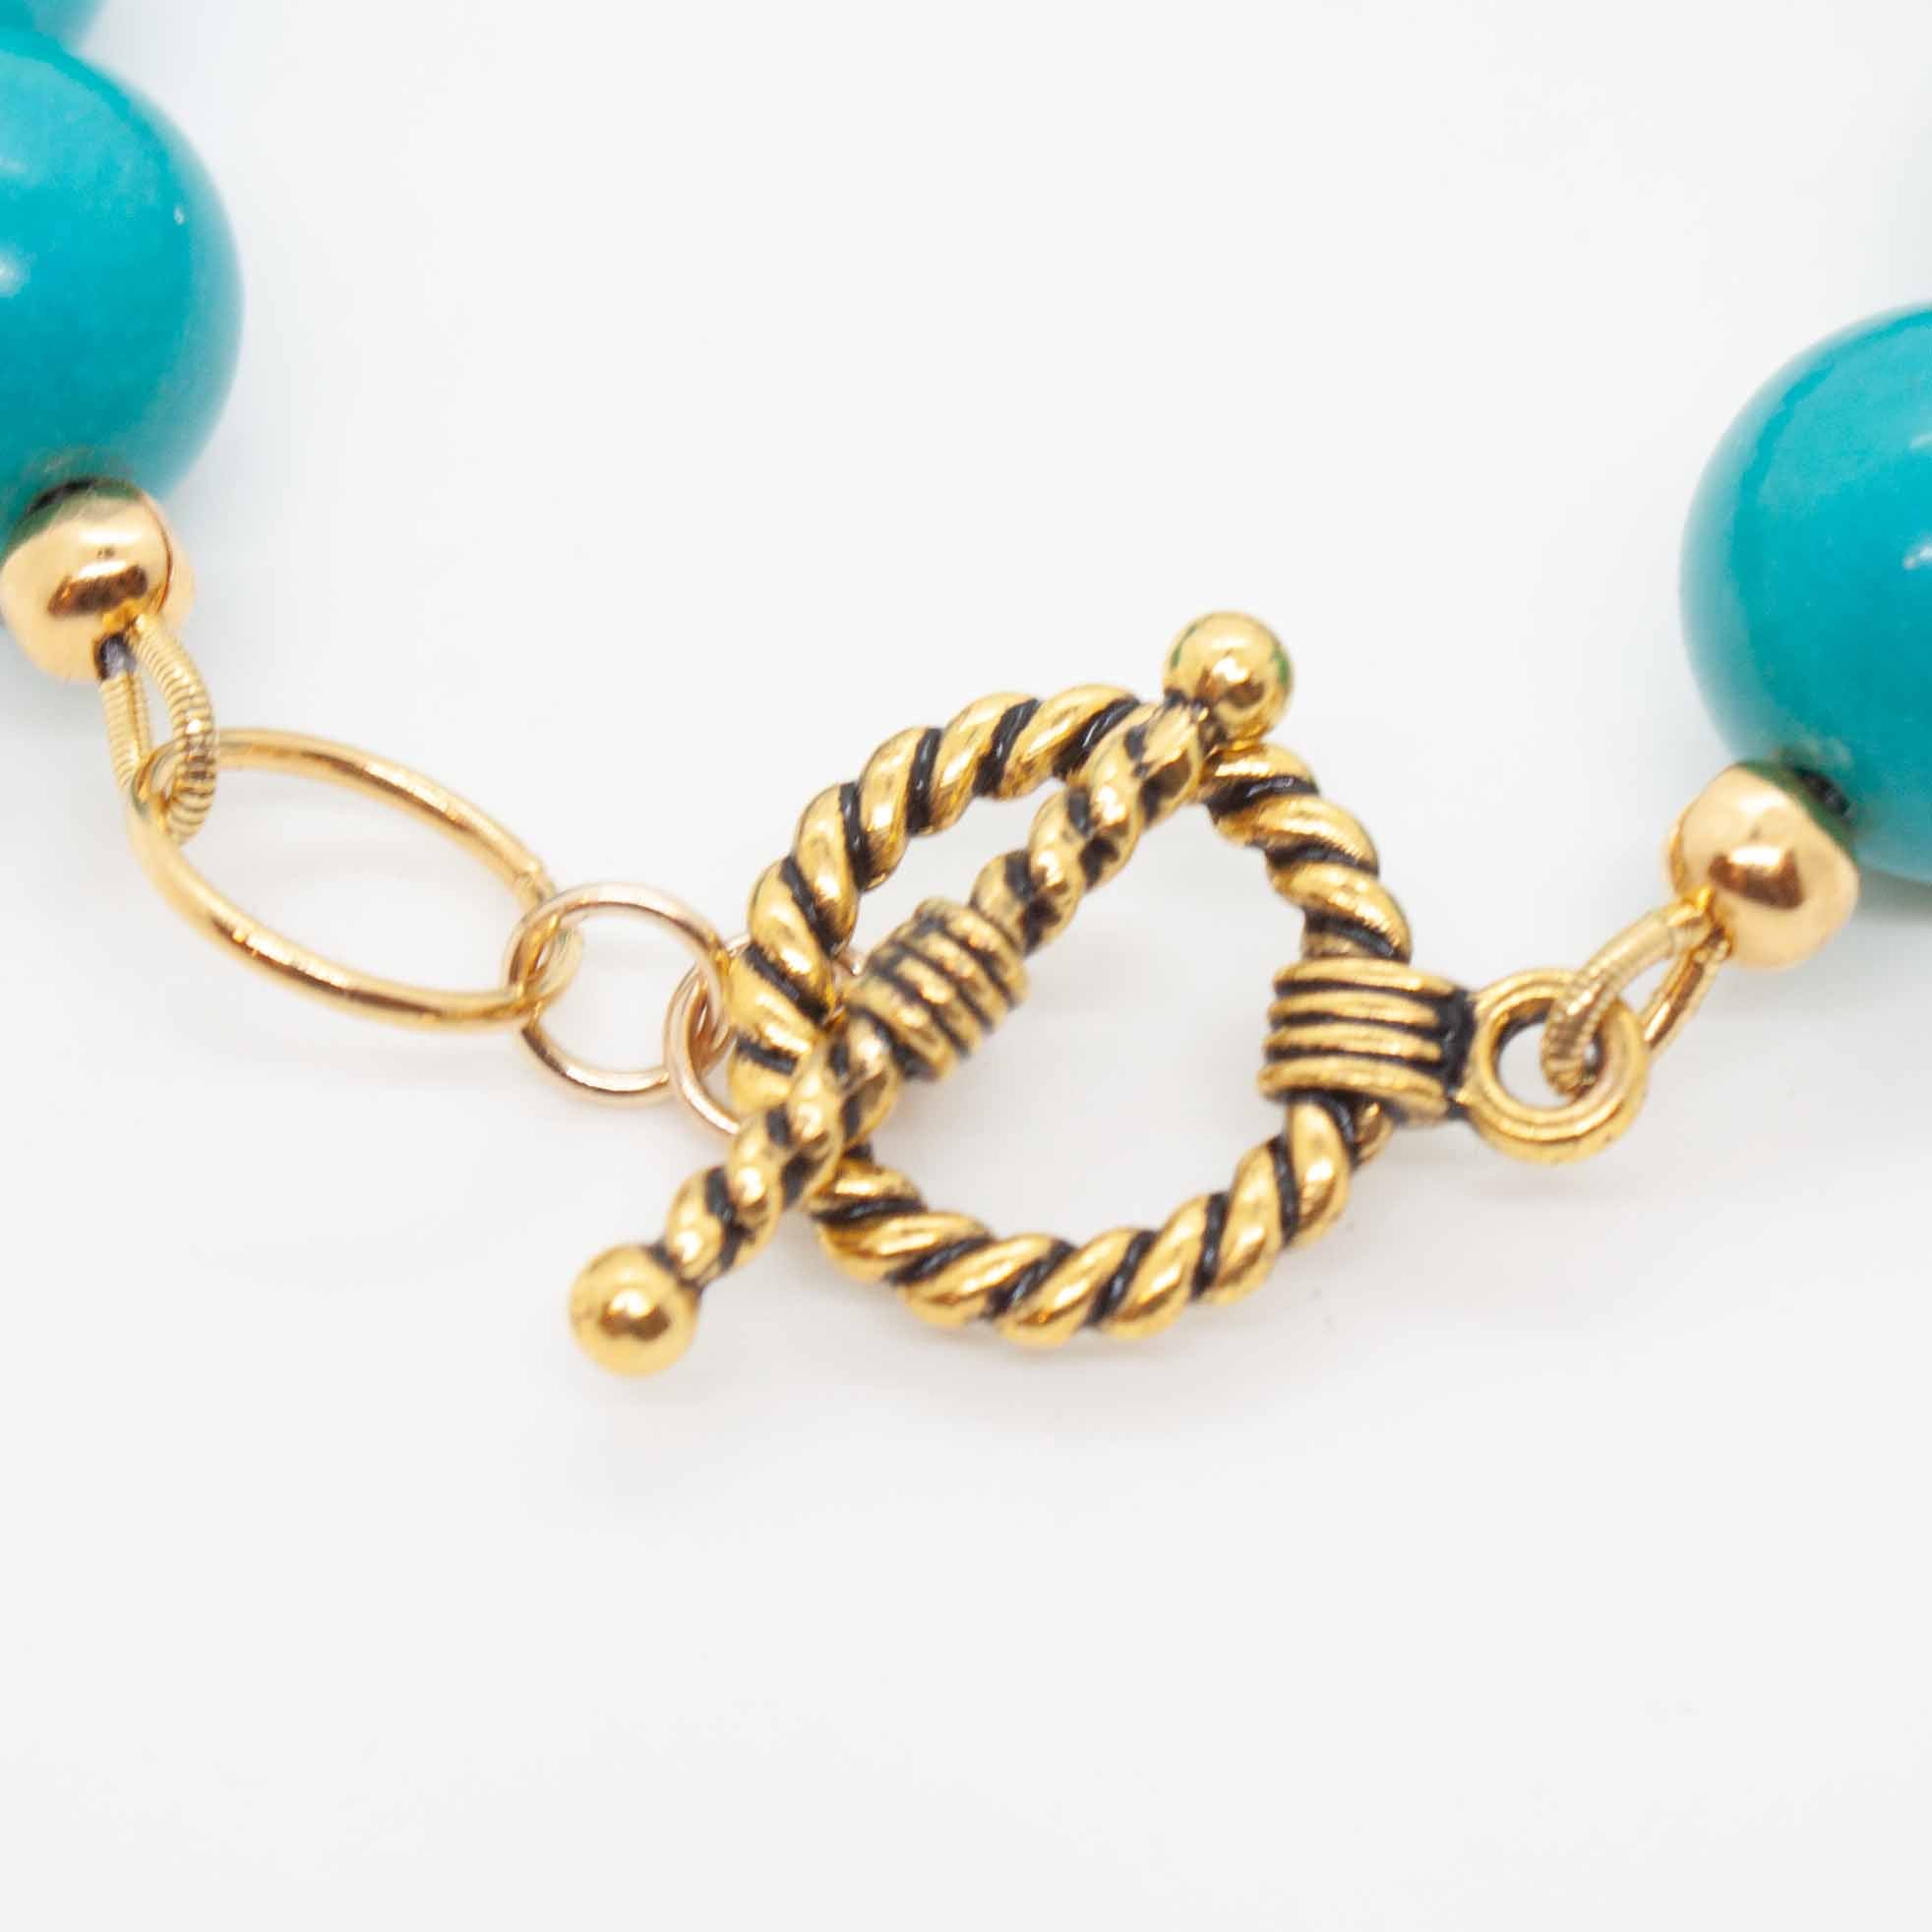 Turquoise and gold offset each other beautifully in this bold statement bracelet. Synthetic* turquoise beads with brass and gold filled accents. Handmade in Toronto by kp jewelry co.  * Synthetic turquoise is a cost-efficient and sustainable alternative to the real thing.  